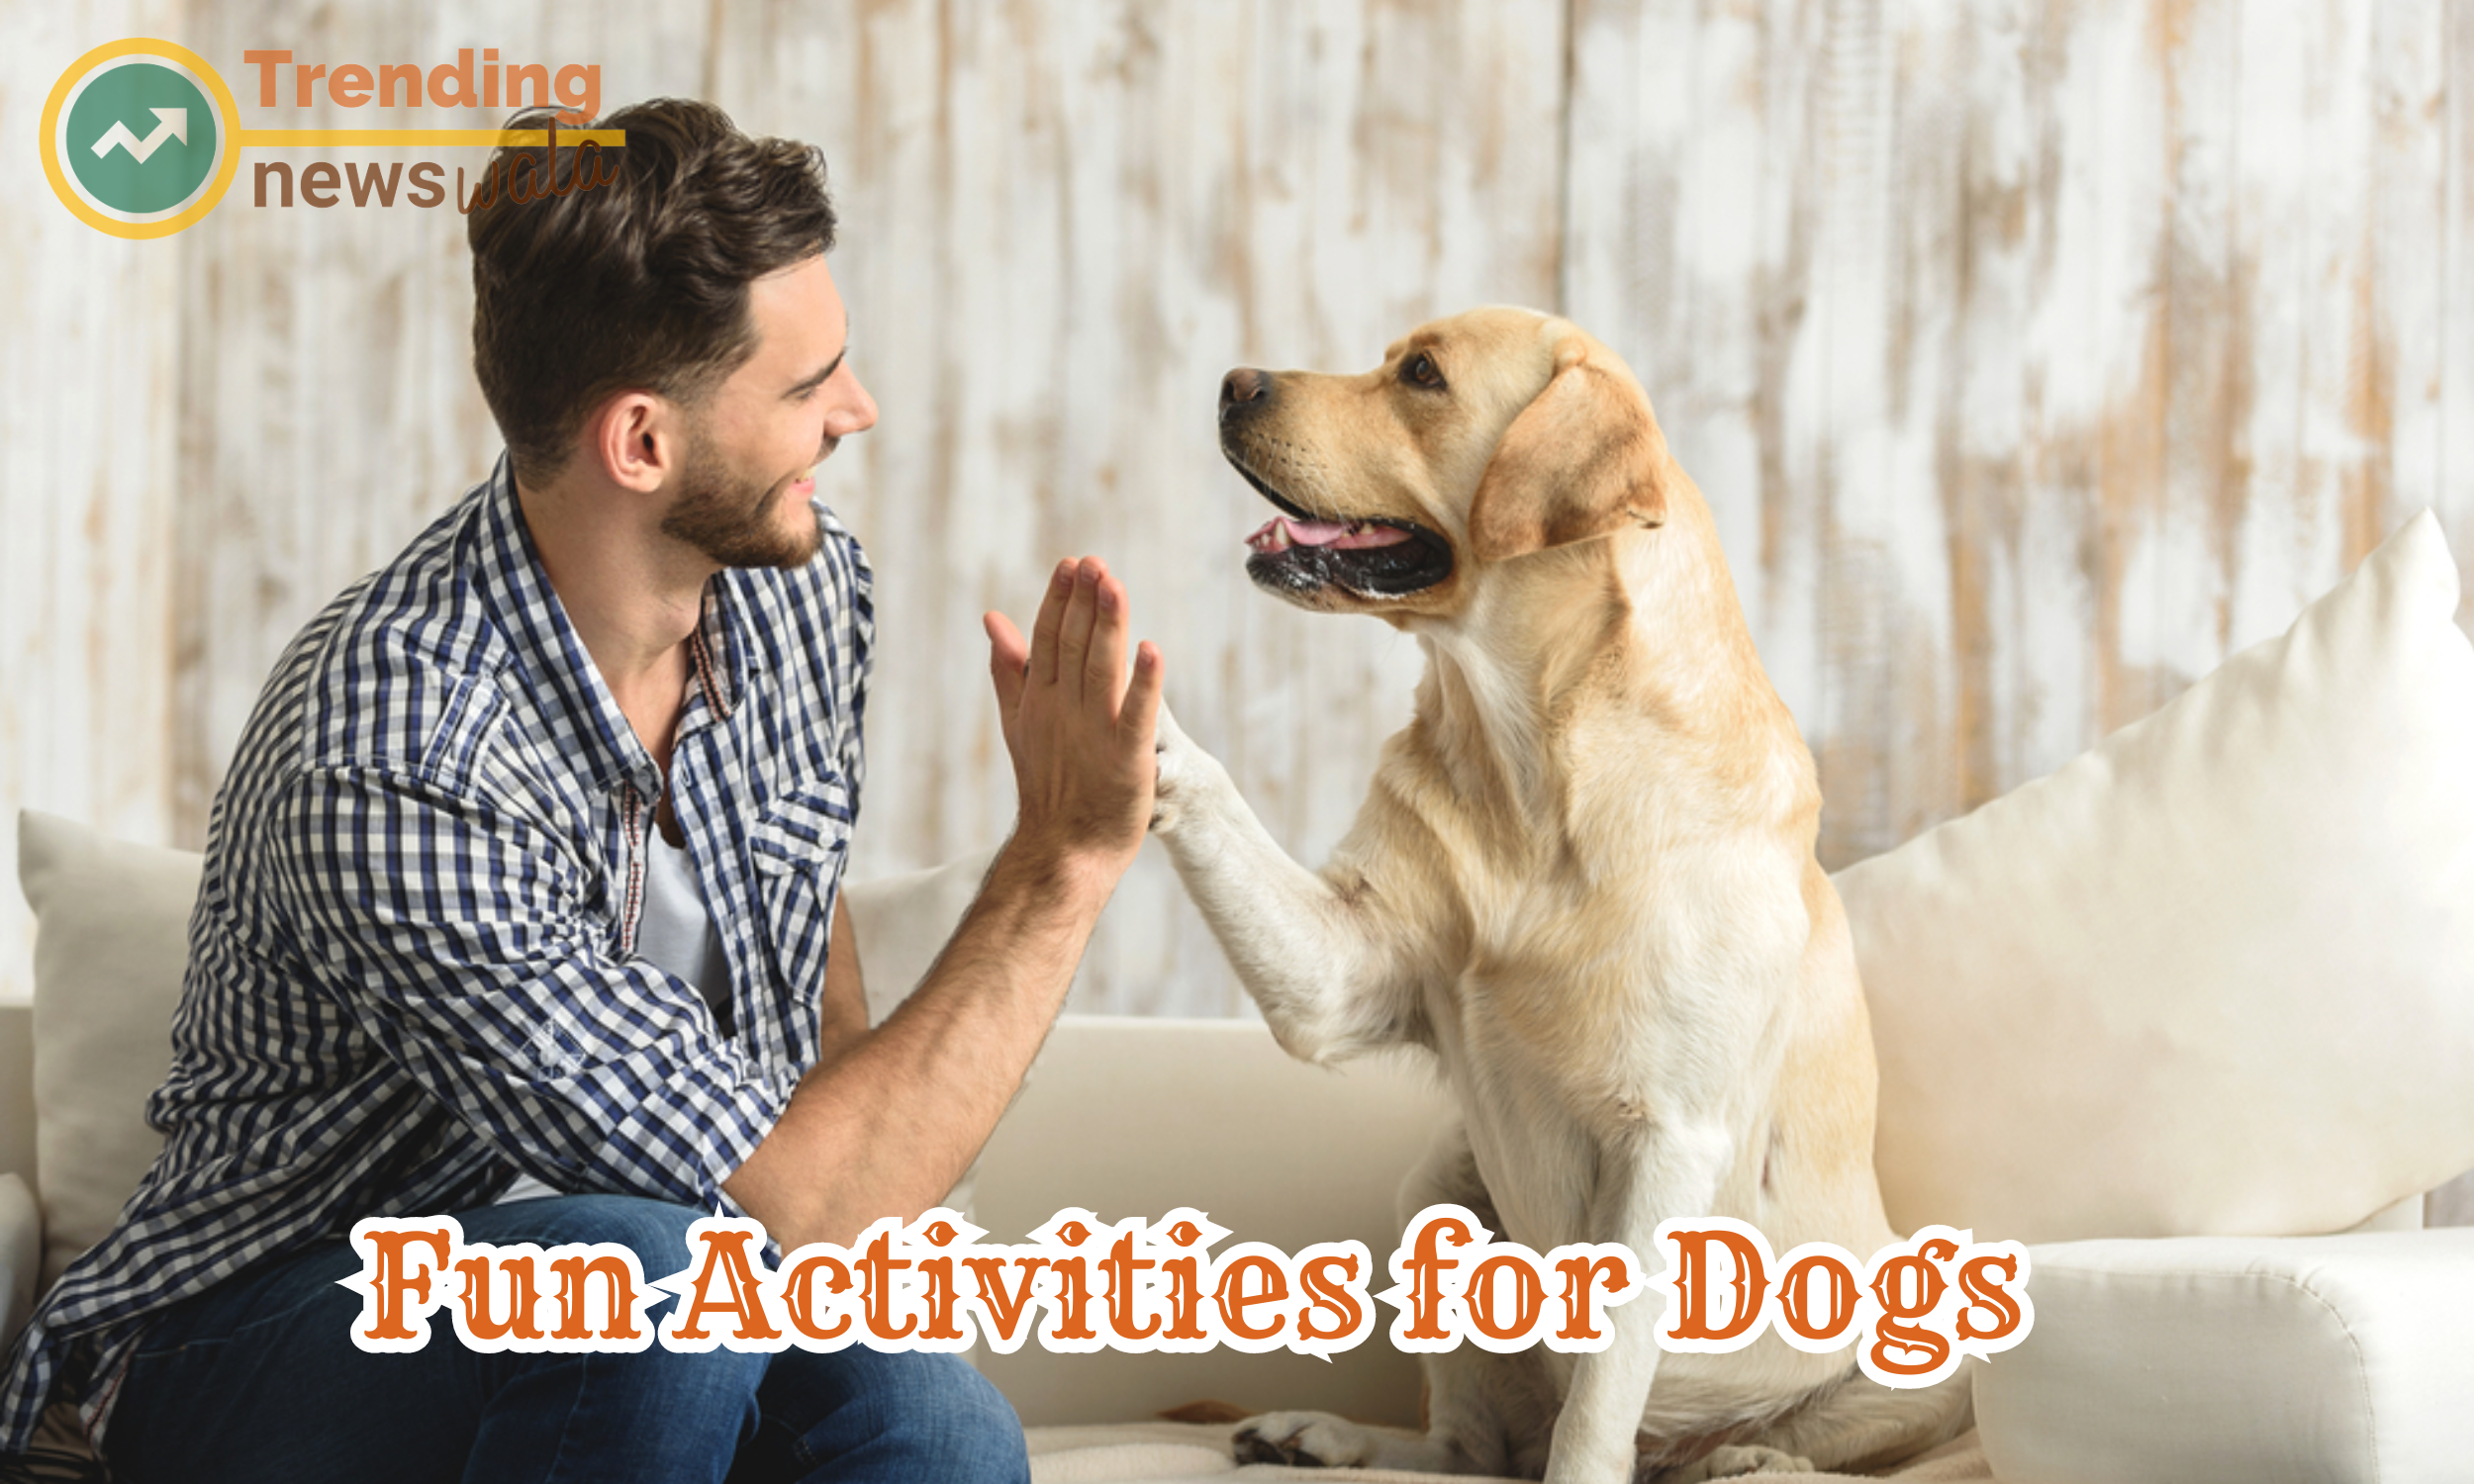 Various fun activities for dogs that can keep them entertained